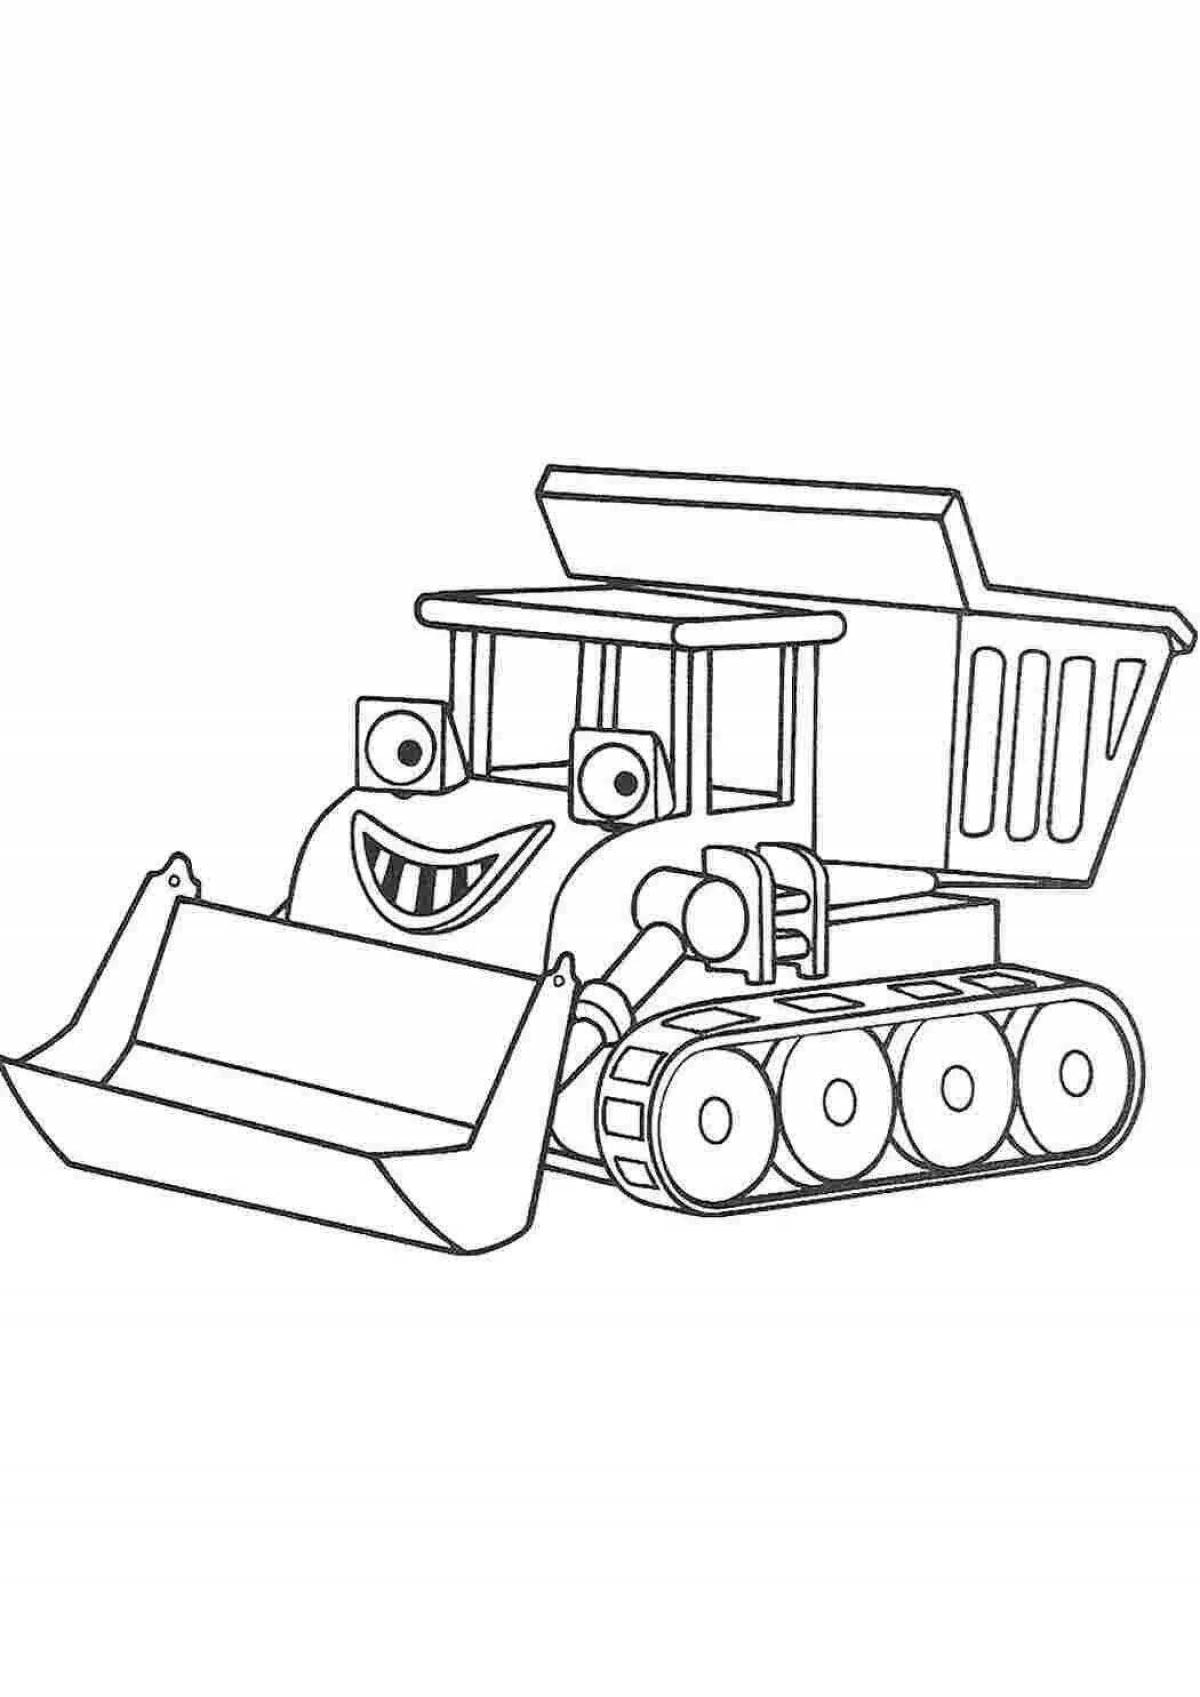 Robot tractor coloring page